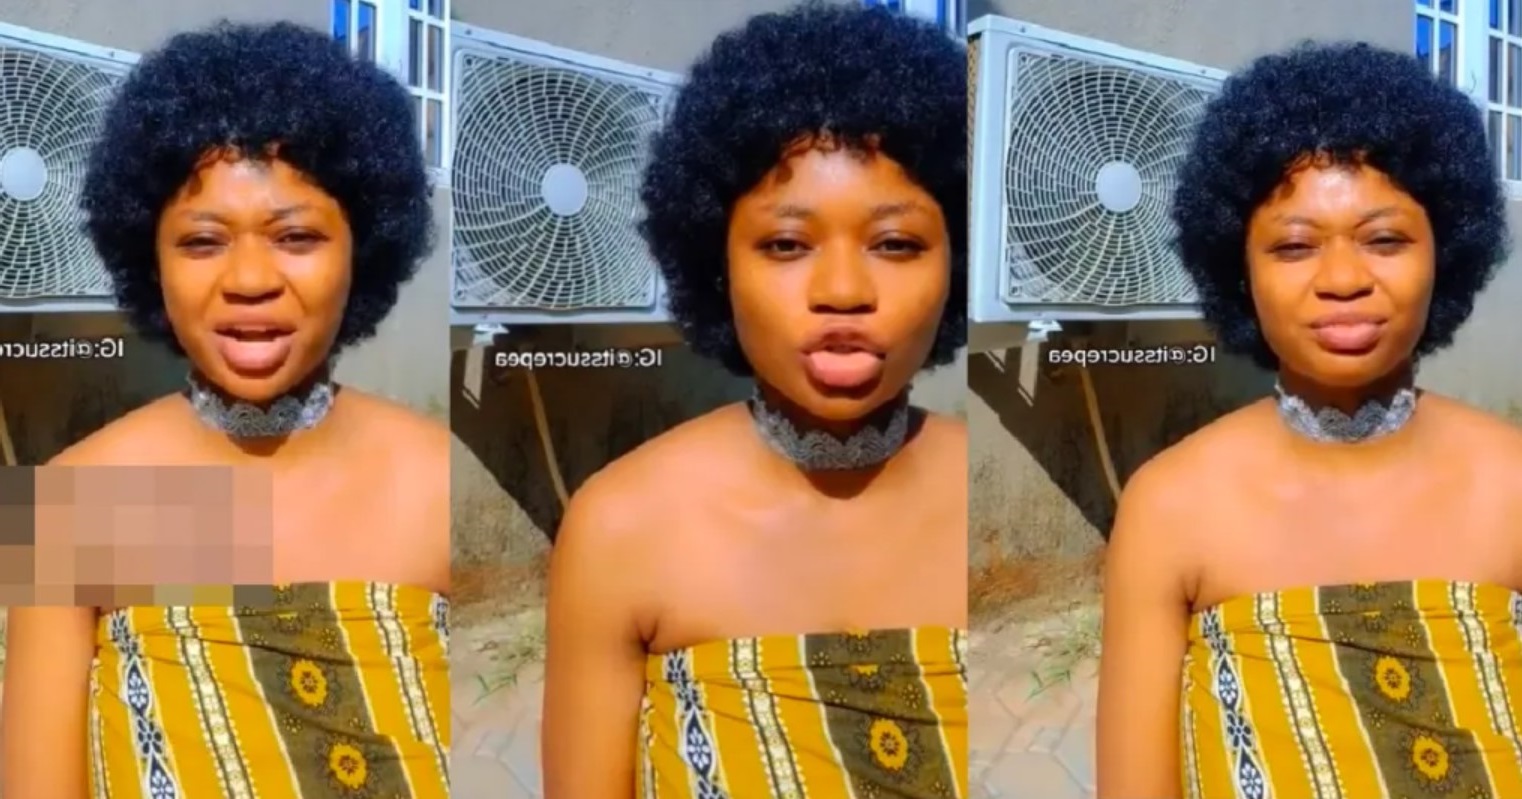 Oyibo Woman Offered To Sardonically Reply To a Winfrey Who Asked If He Was Familiar With Africans Having Air Conditioners (VIDEO).